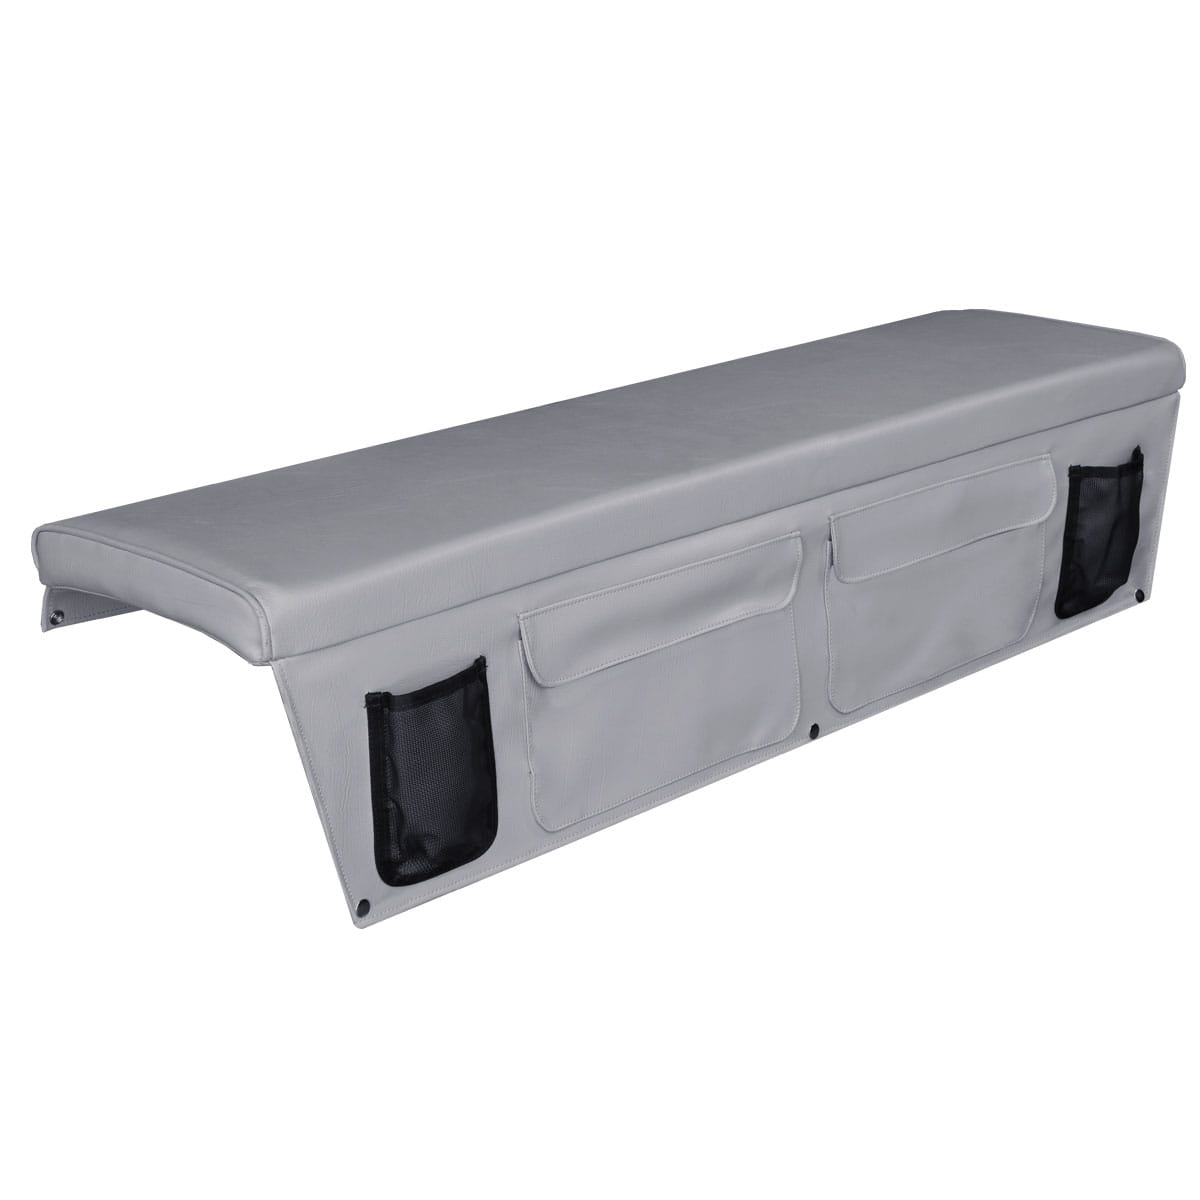 Boat Bench Cushion With Side Pockets